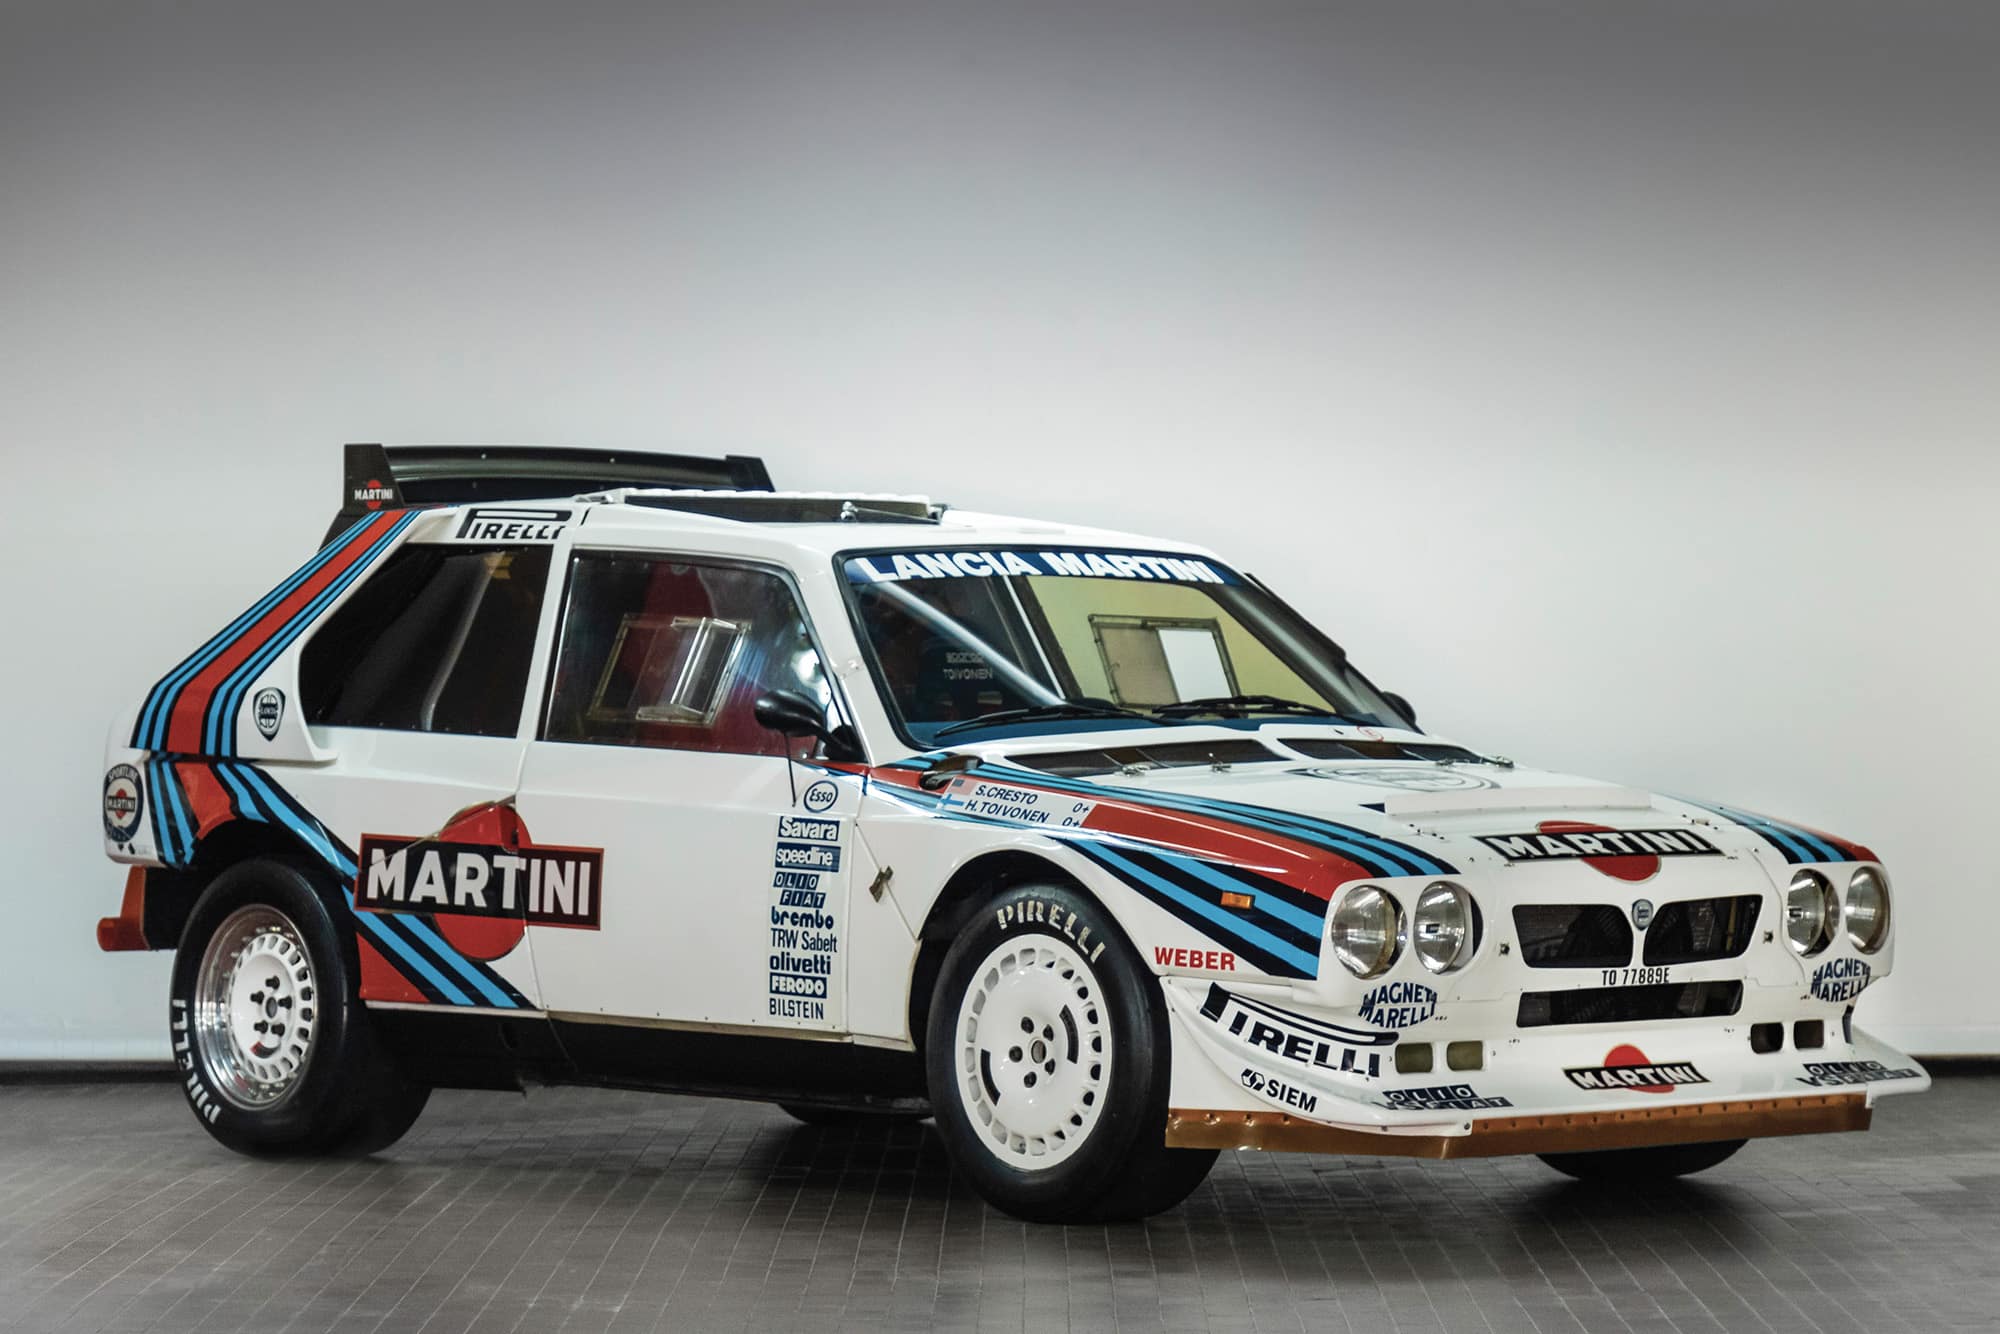 1985 RAC Rally-winning Lancia Delta S4 due to be auctioned